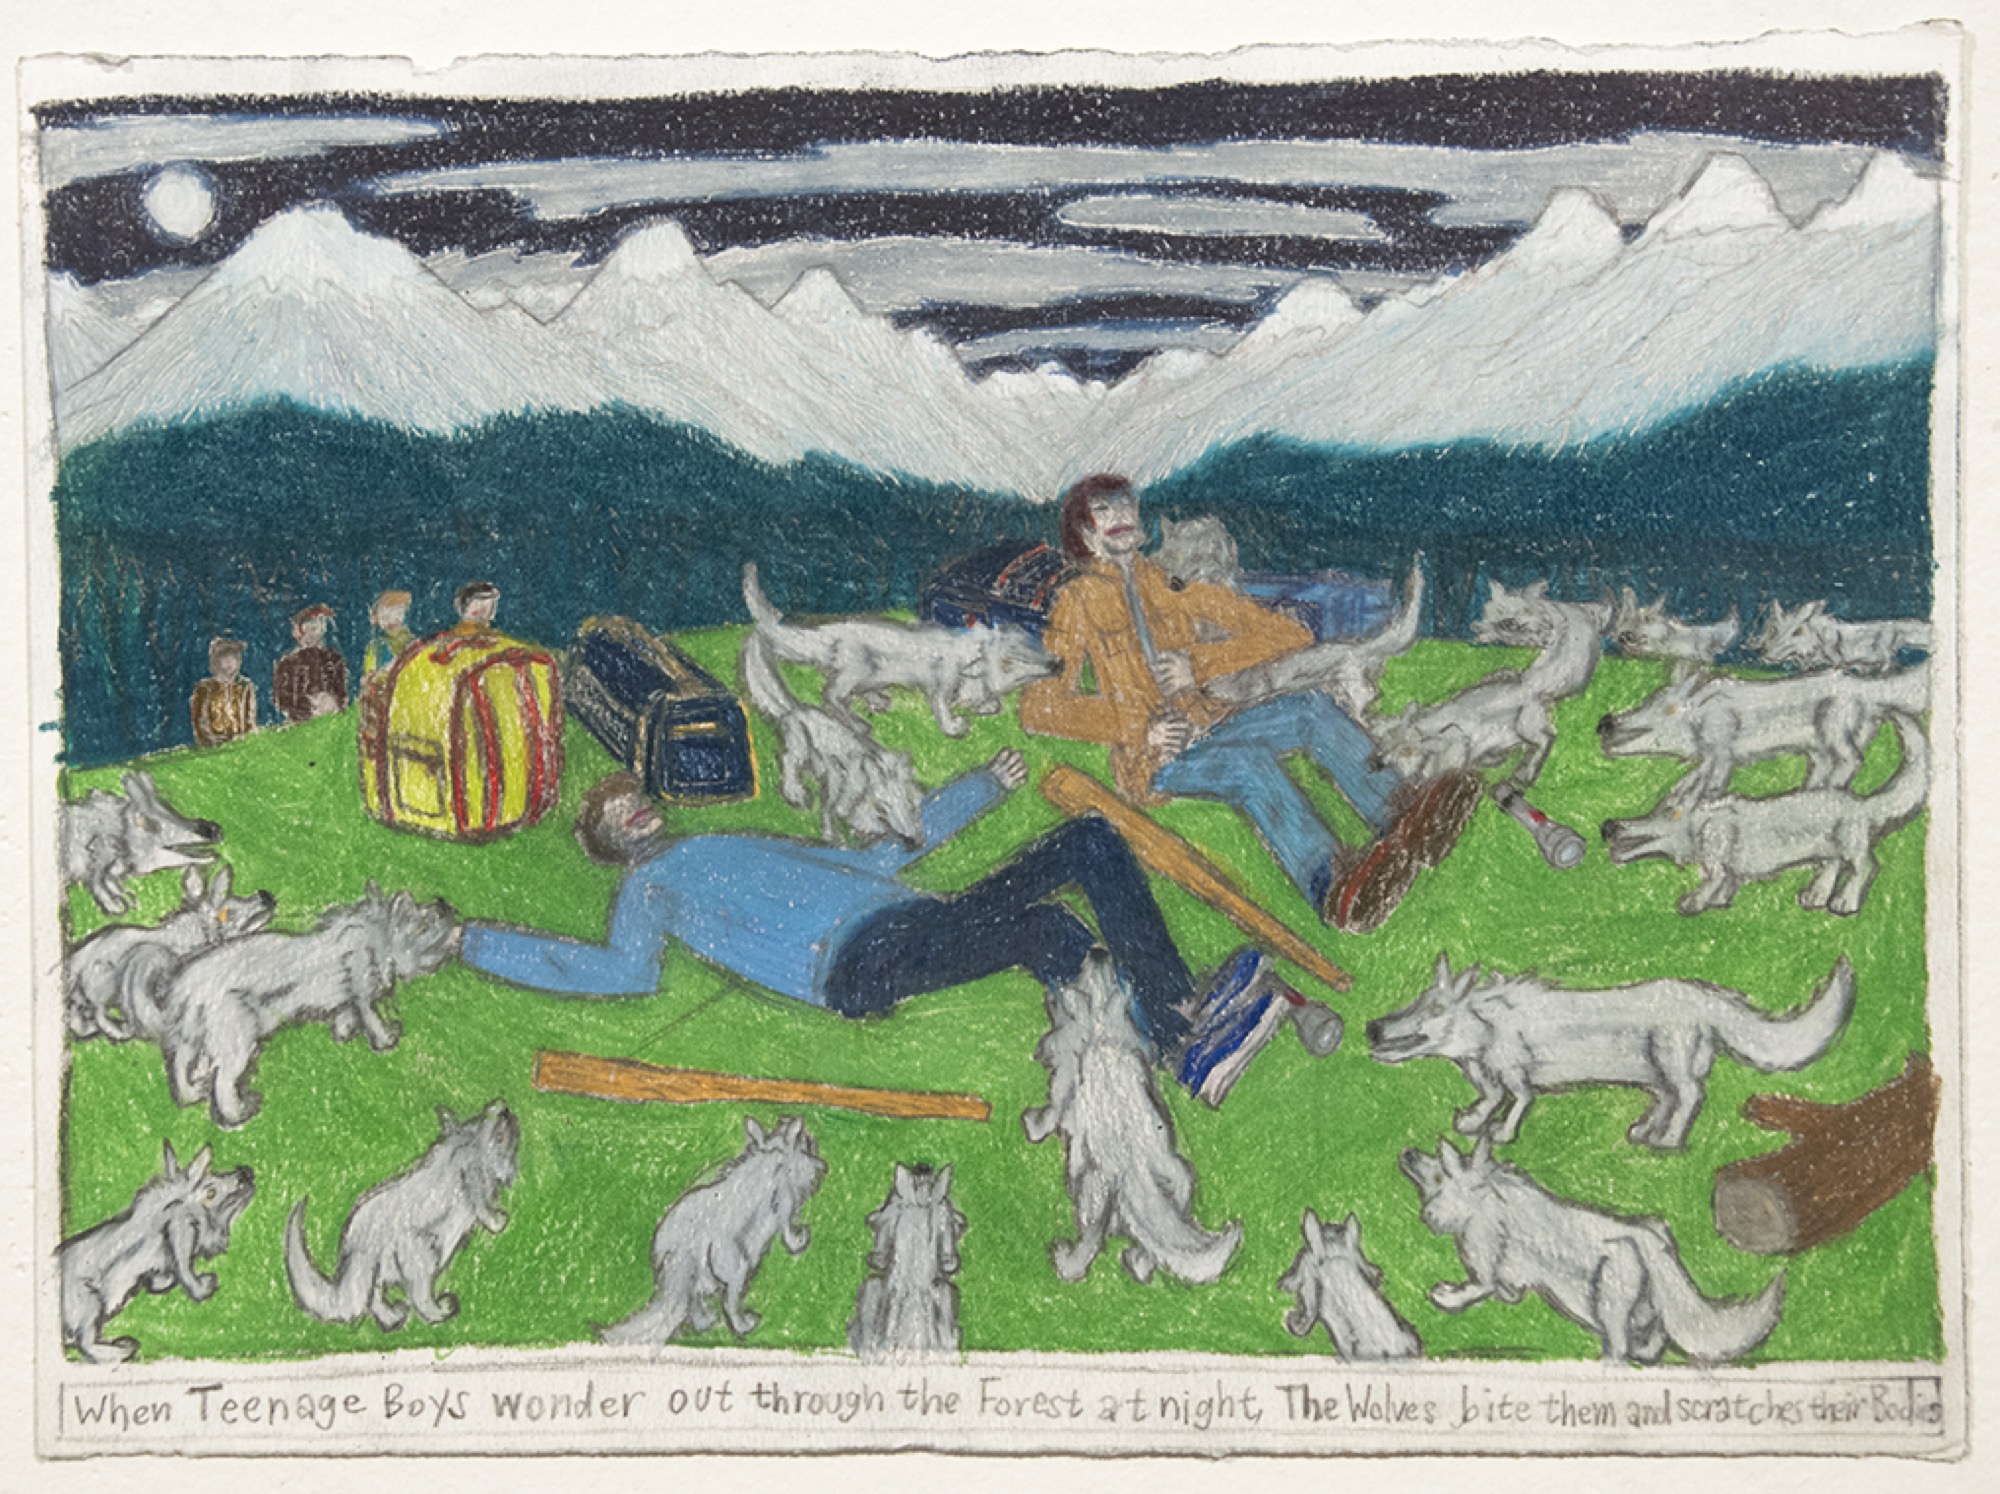 Samraing Chea, <em>When Teenage Boys wonder out through the forest at night, The Wolves bite them and scratch their Bodies</em>, 2017, pencil on paper, 25.5 × 35 cm, courtesy the artist and Arts Project Australia. Photo: Andrew Curtis.